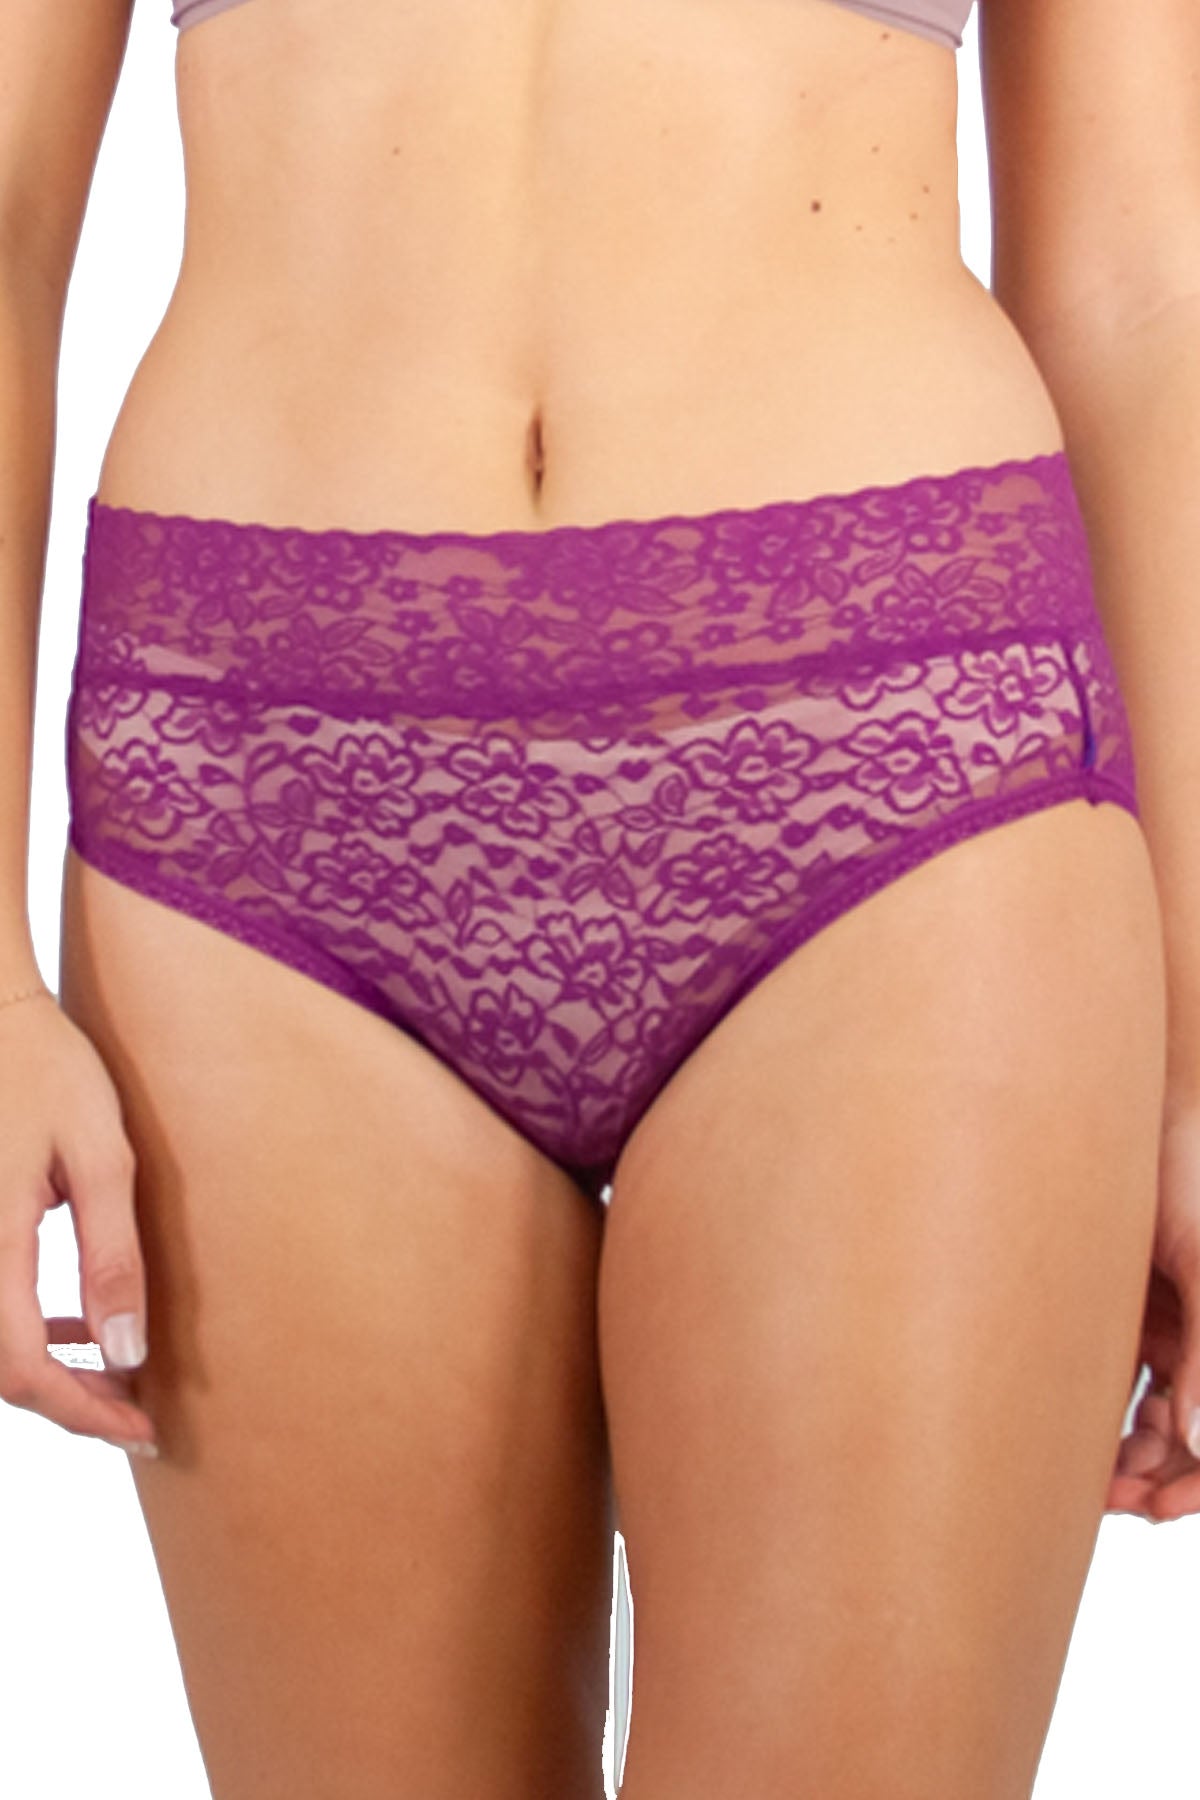 Lovely Lace panty - A good and stable fit that is perfect for everyday